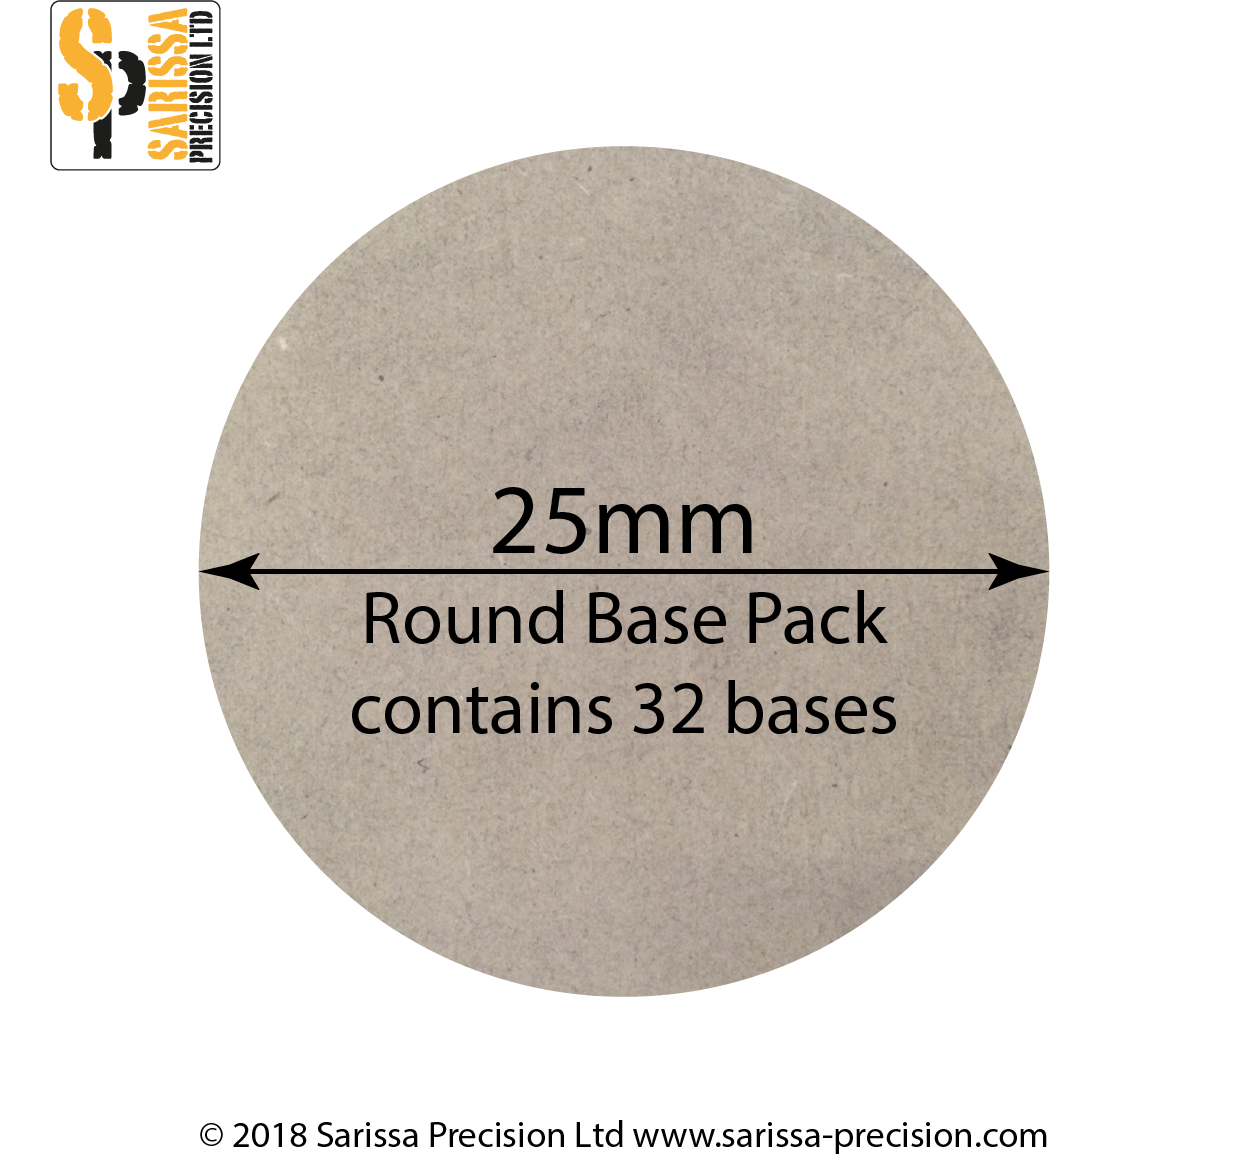 25mm Round Base Pack